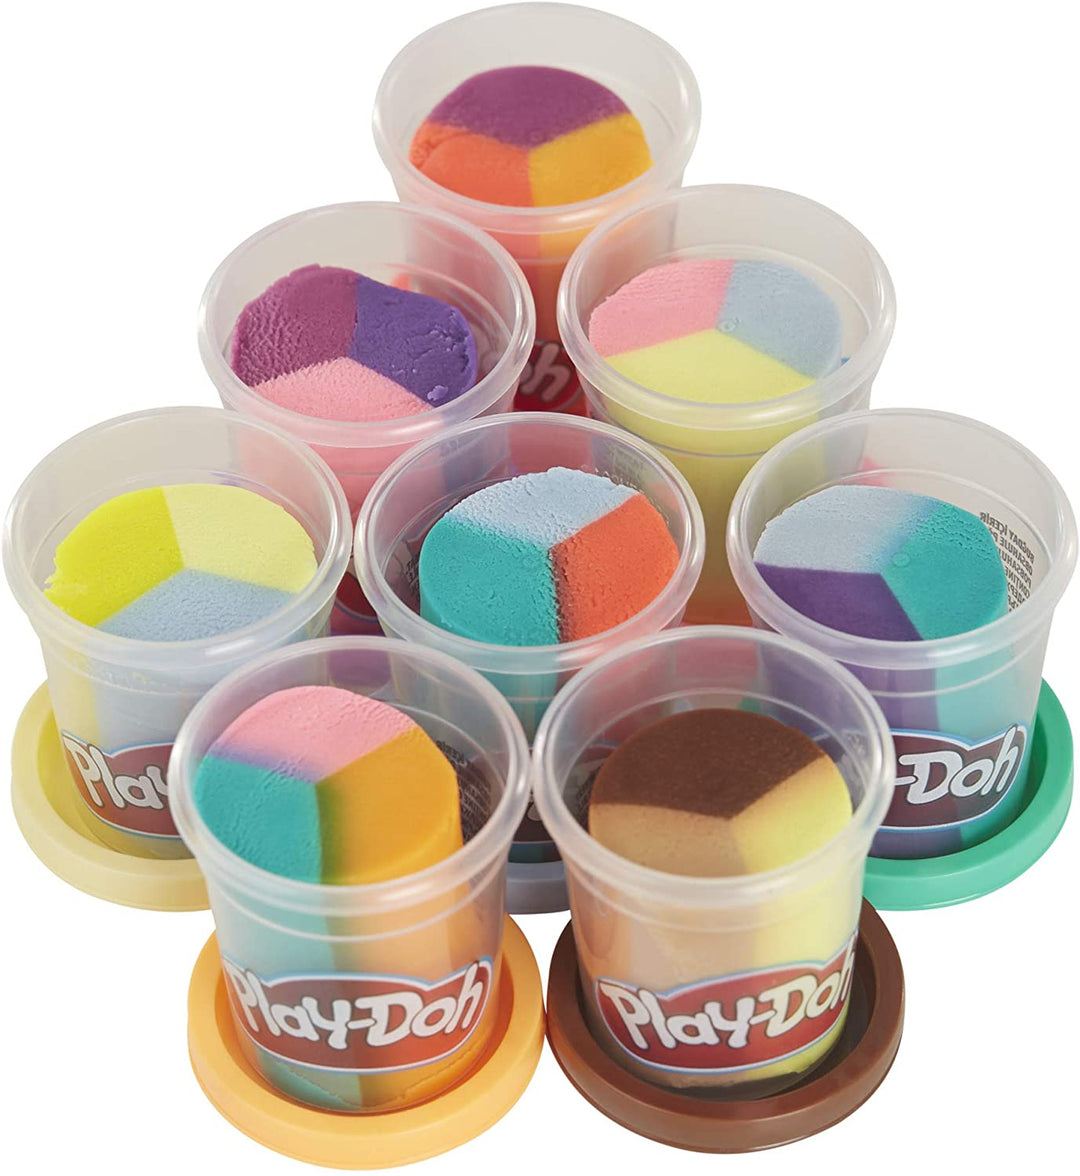 Play-Doh Crazy Cuts Stylist Hair Salon Pretend Play Toy for Kids 3 Years and Up with 8 Tri-Color Cans, 2 Ounces Each, Non-Toxic, F1260